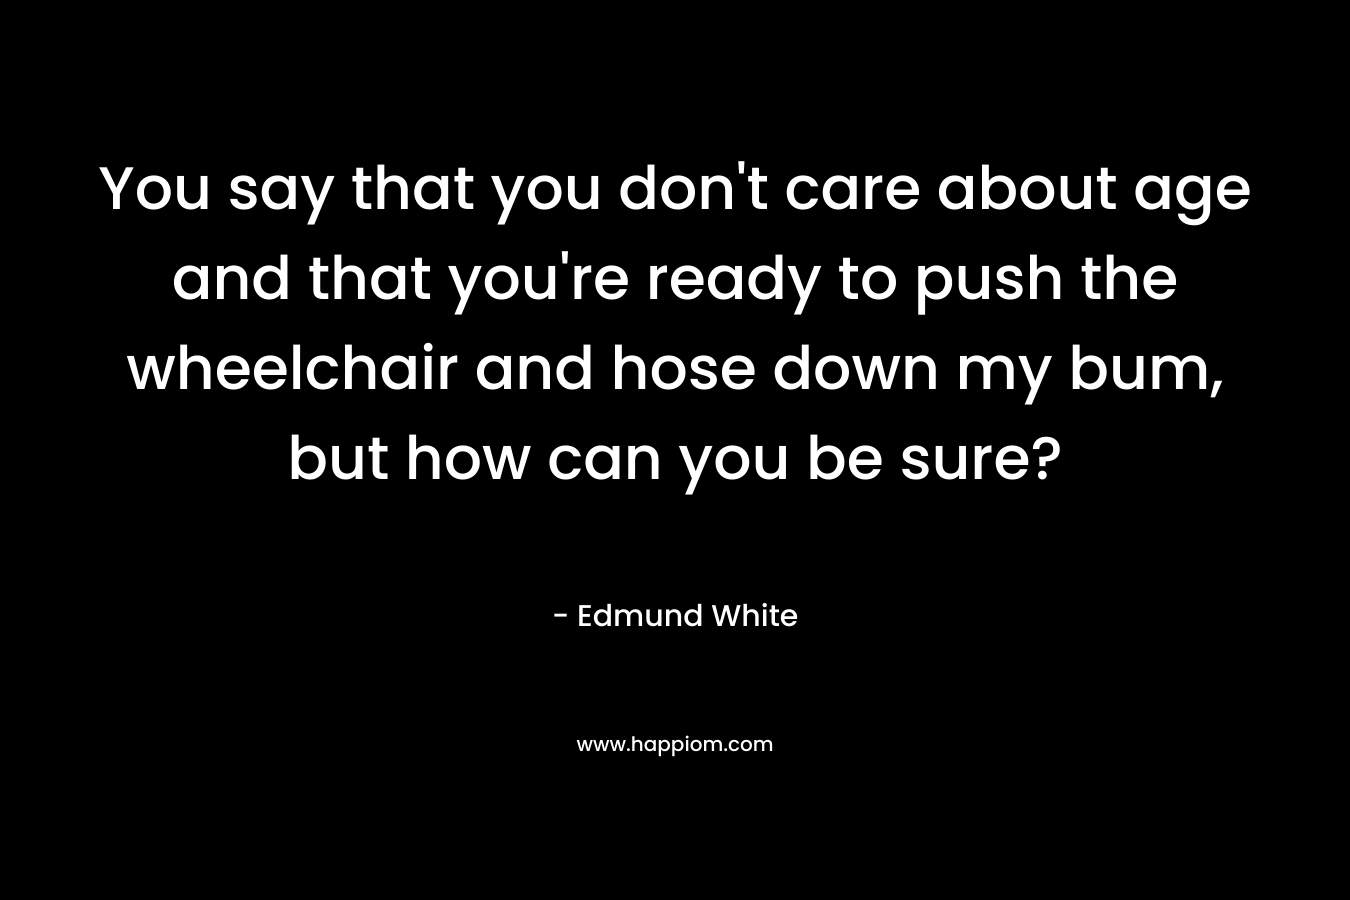 You say that you don’t care about age and that you’re ready to push the wheelchair and hose down my bum, but how can you be sure? – Edmund White